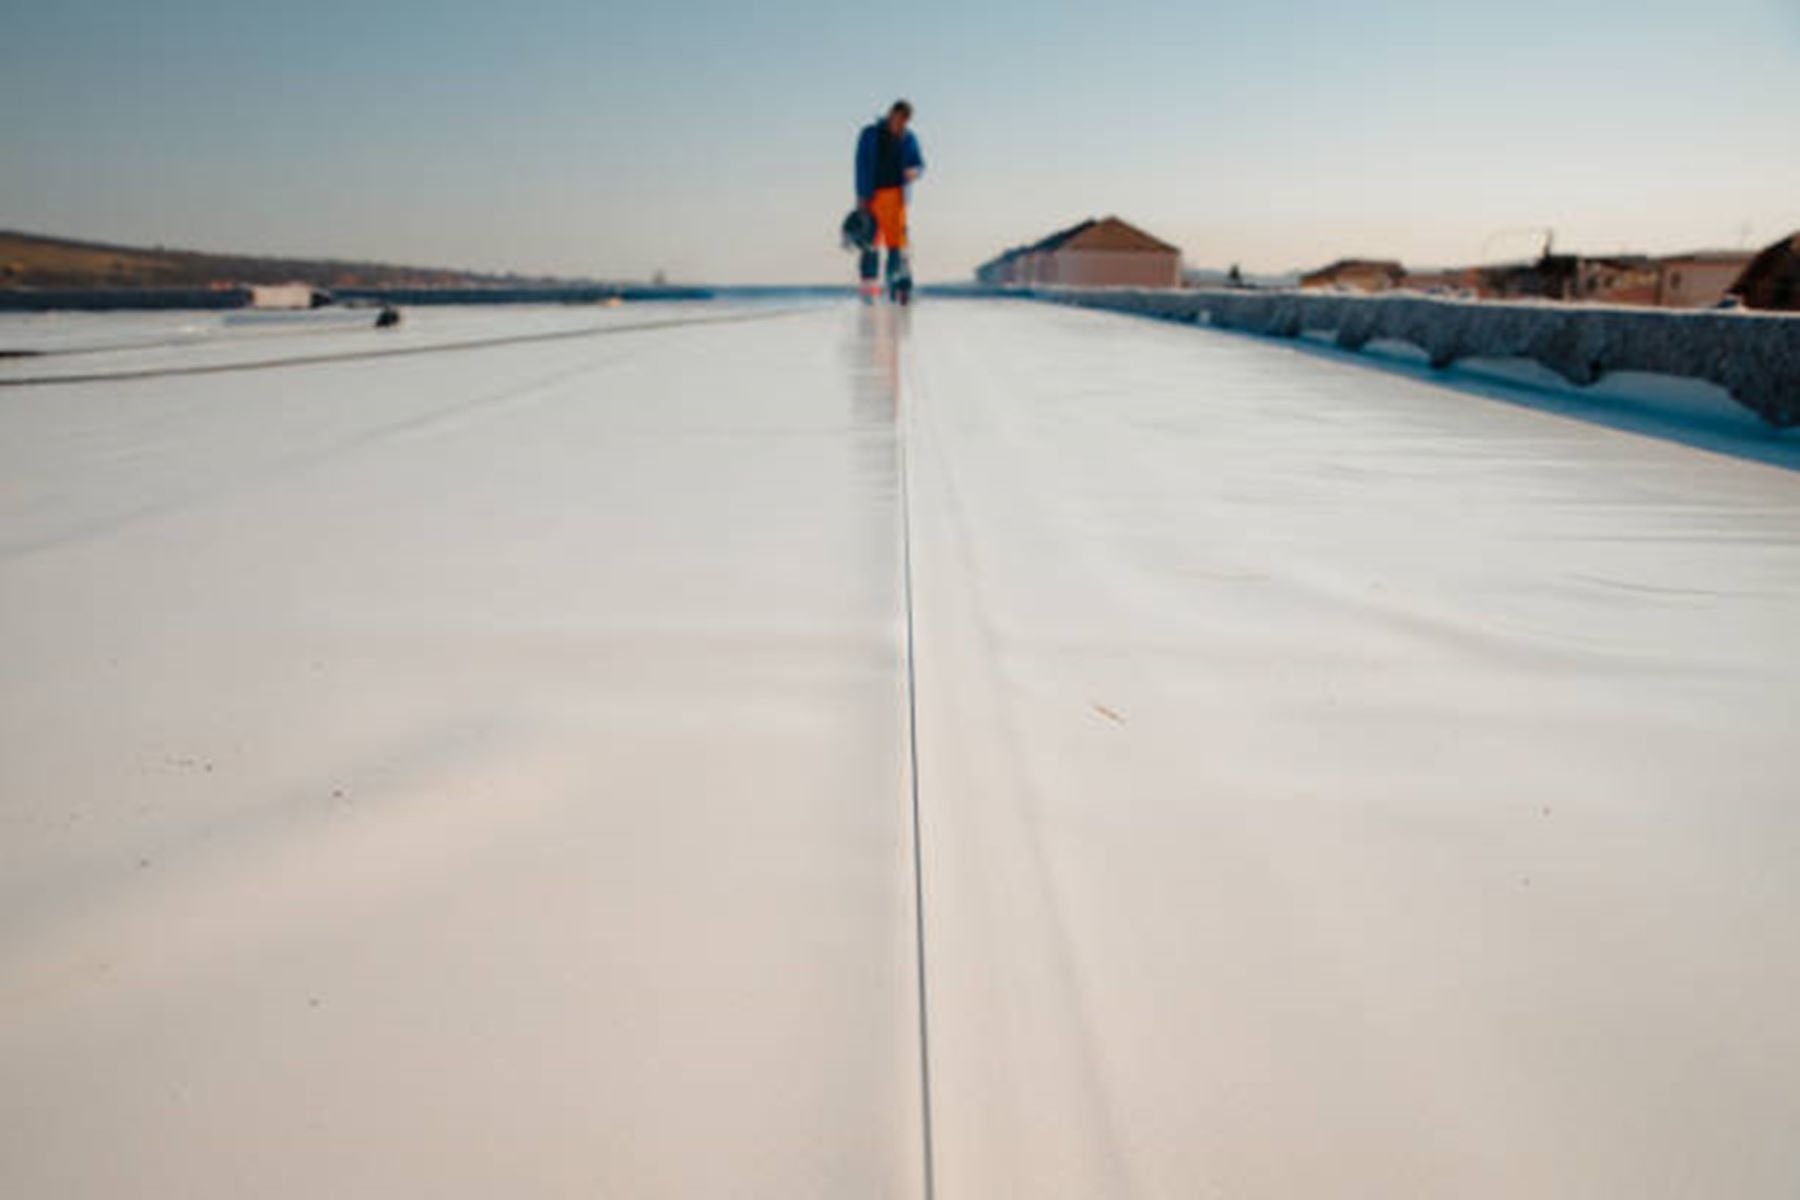 How To Choose the Right Roofing Material Based on Different Locations and Climates